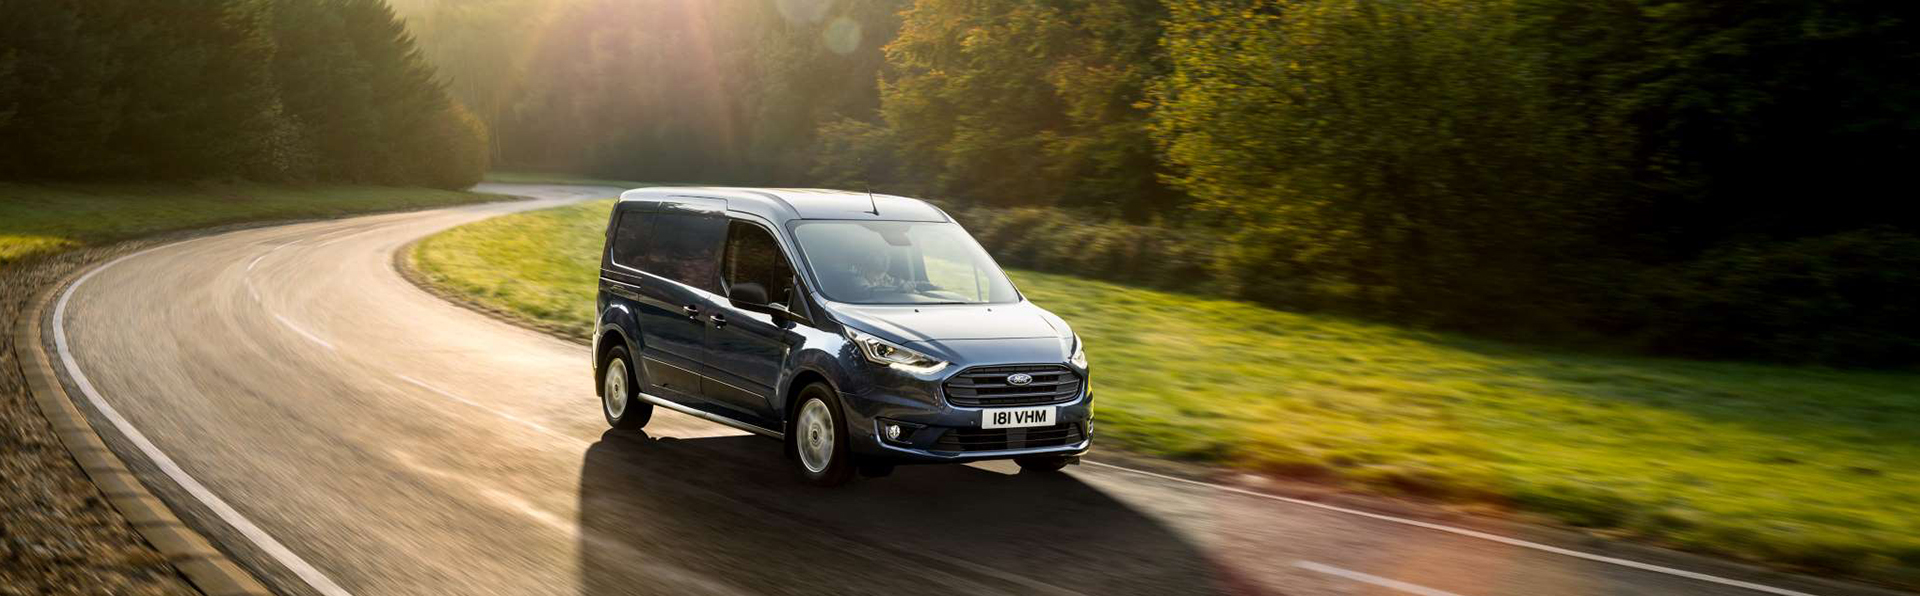 Ten Reasons why Leasing a Van is a Good Option